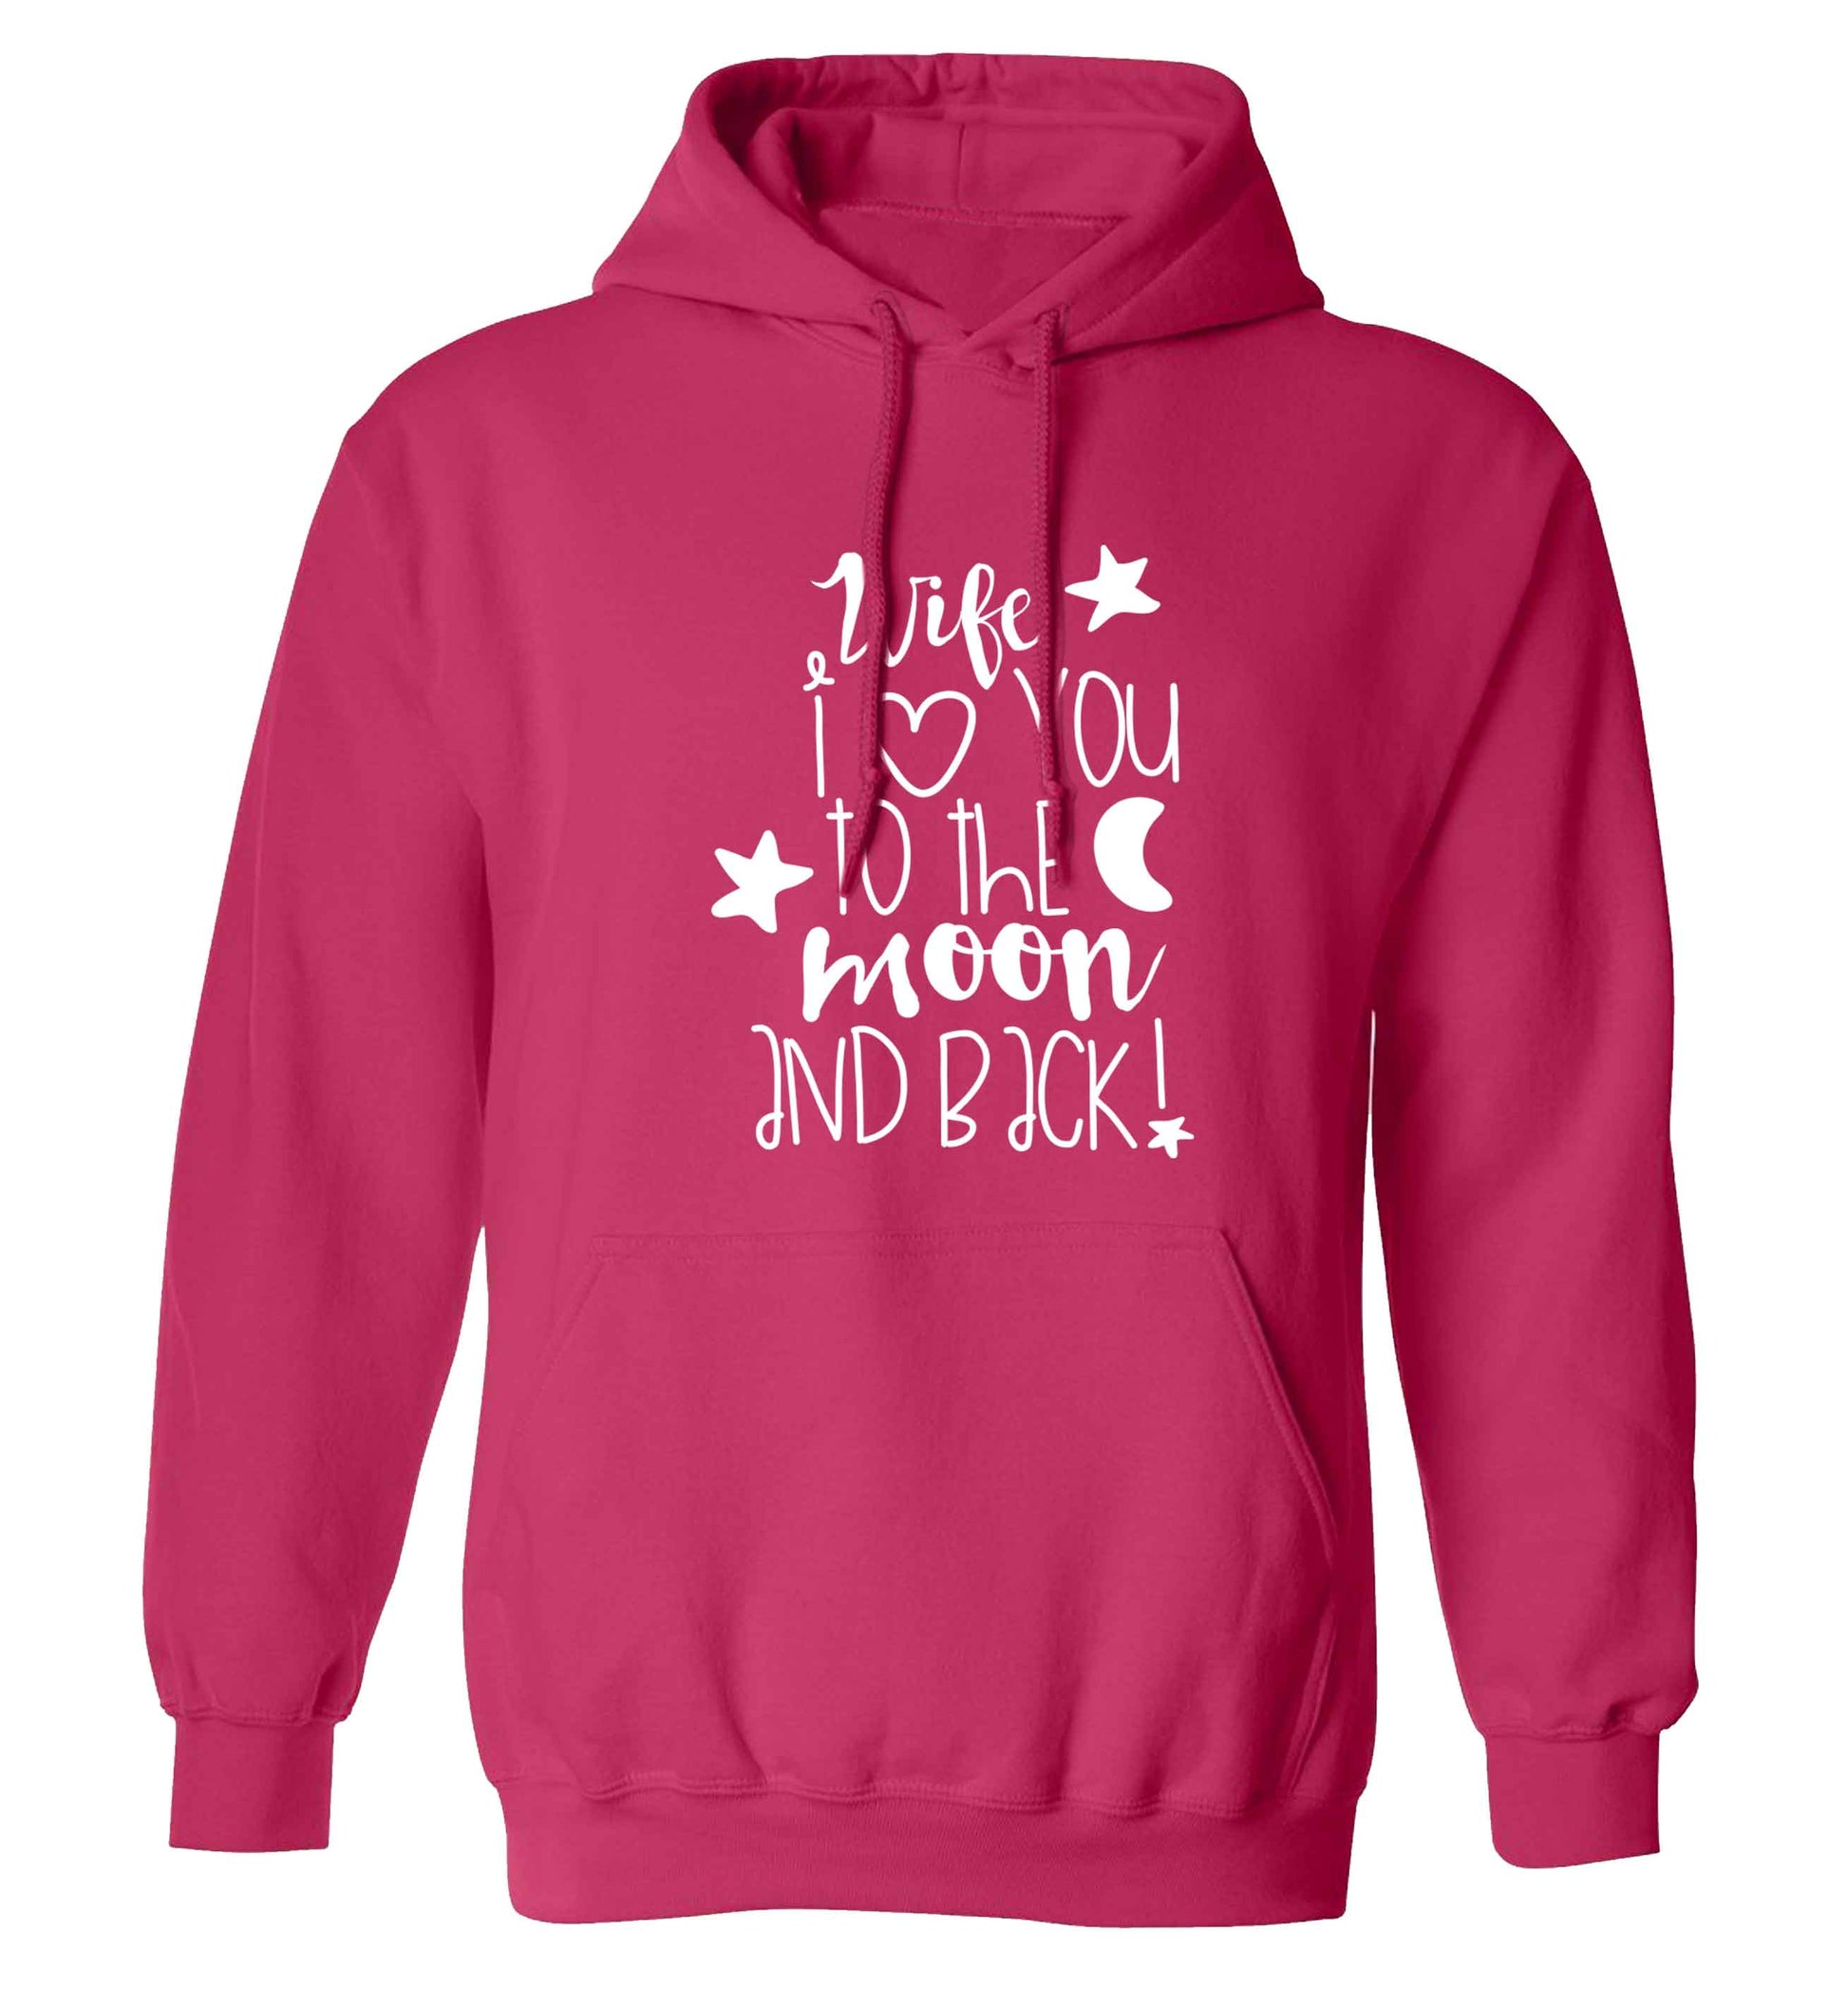 Wife I love you to the moon and back adults unisex pink hoodie 2XL